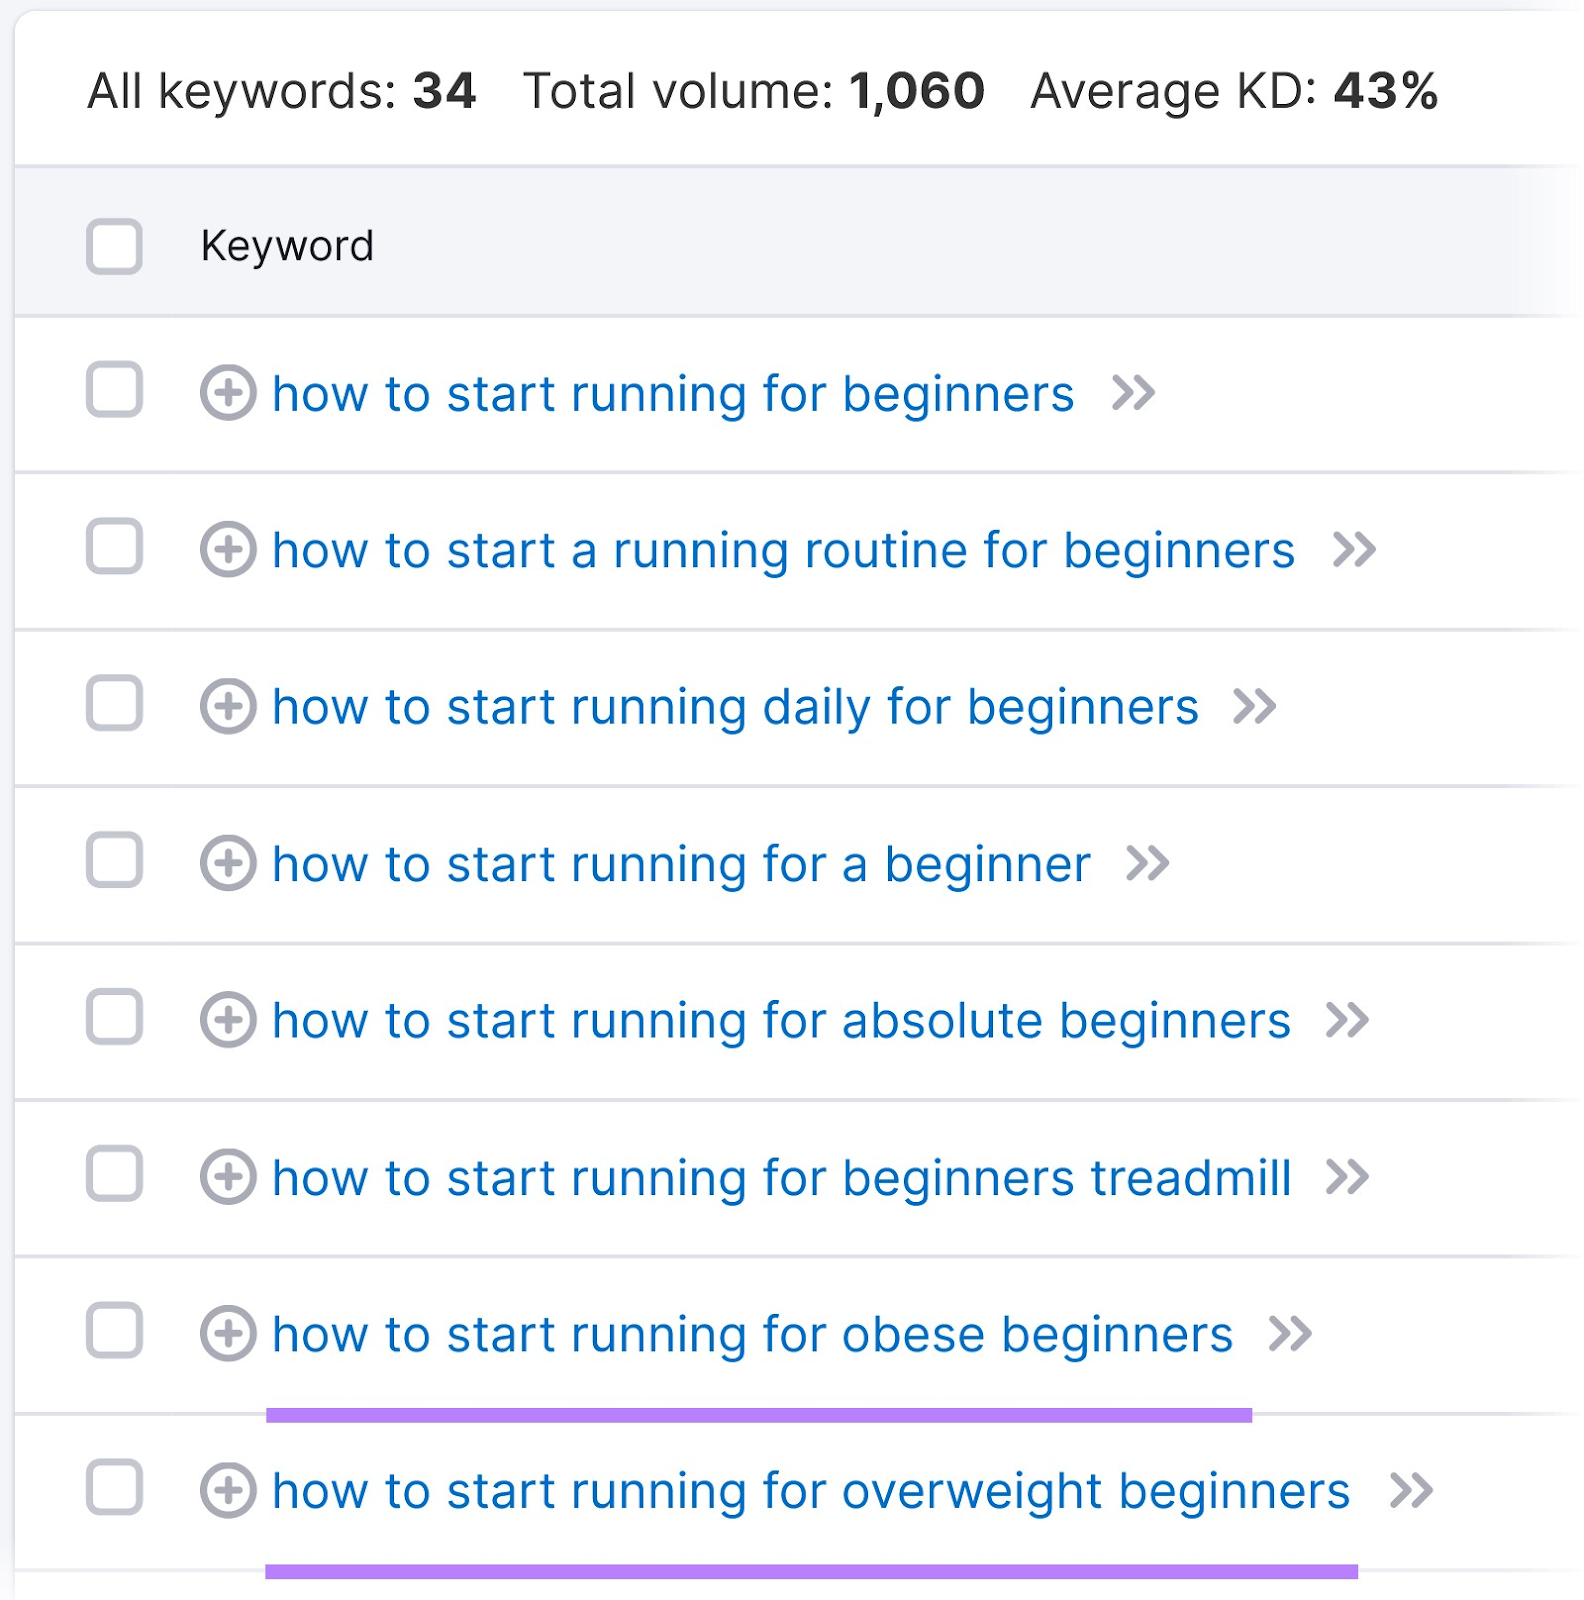 Examples of related keywords and potential subtopics for "how to start running"